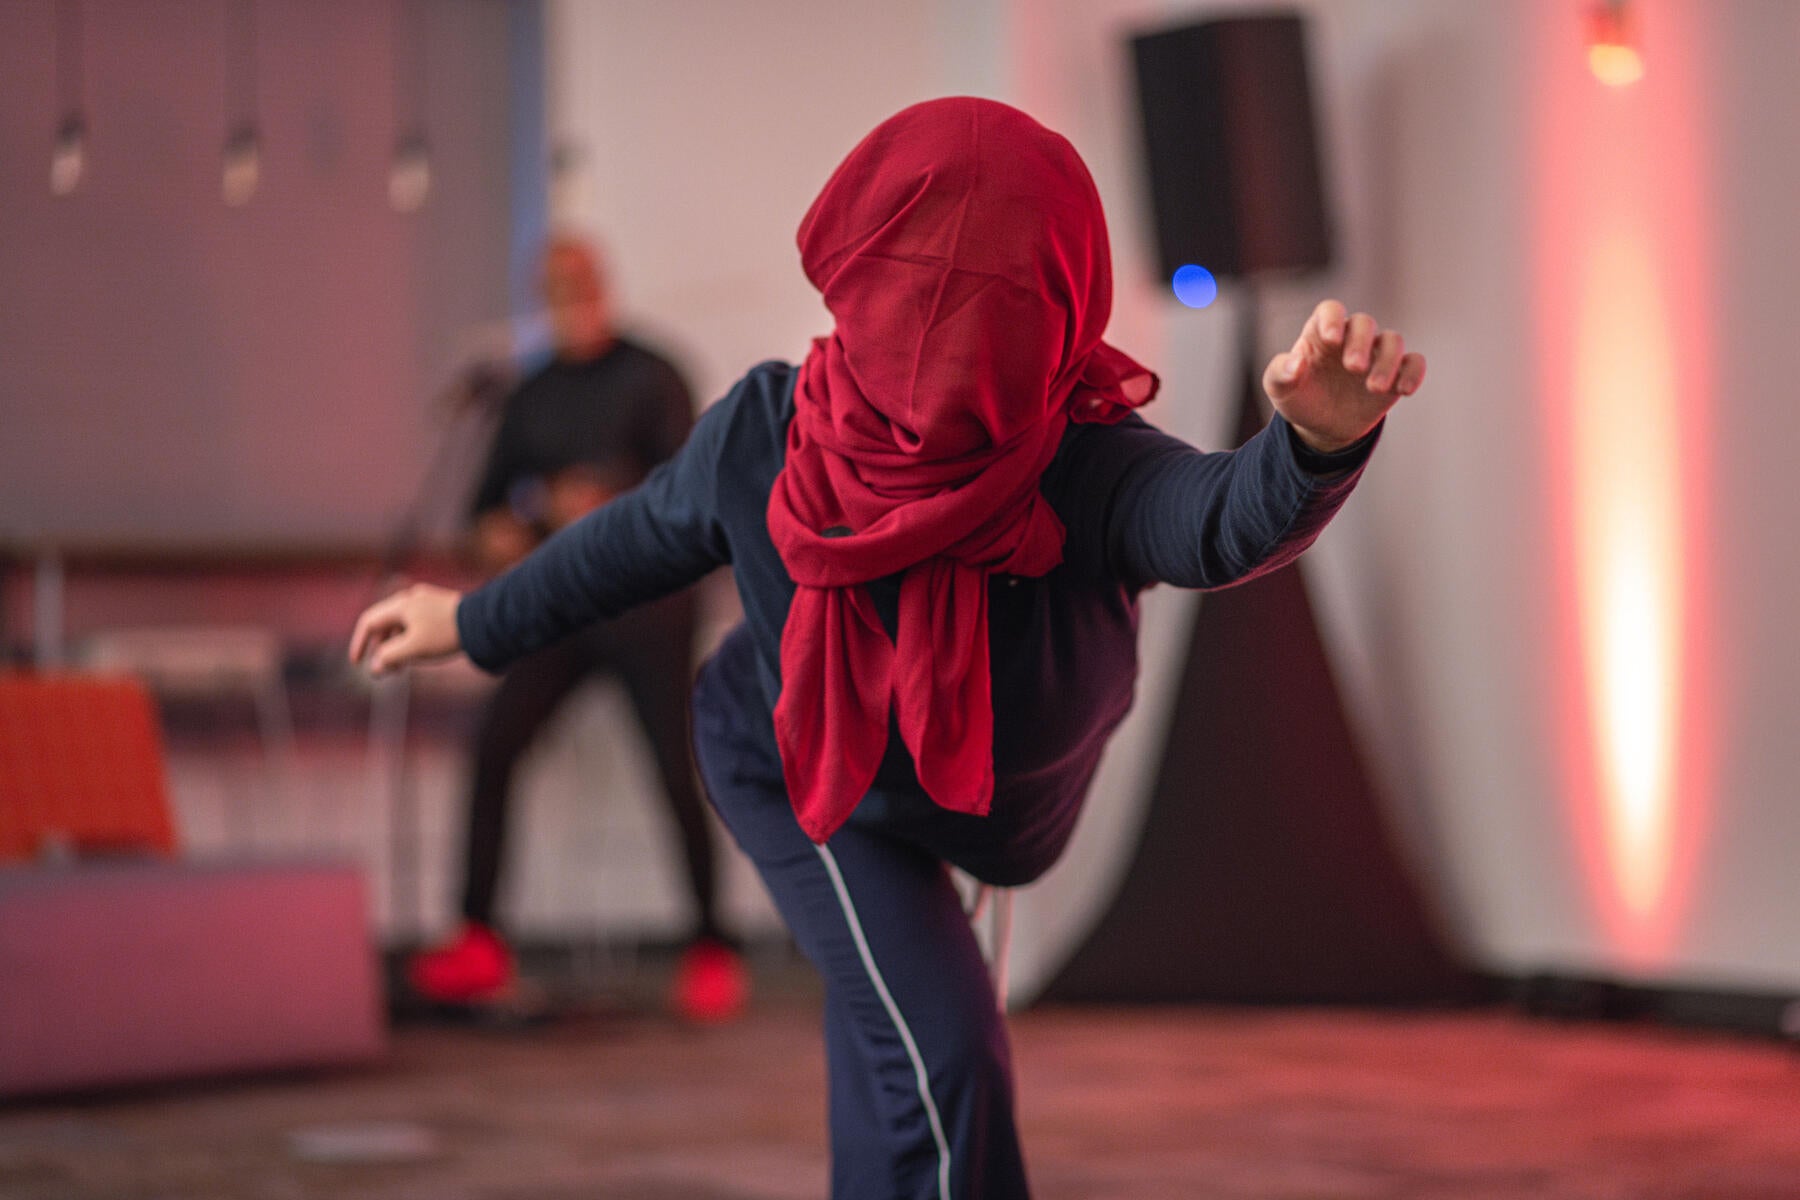 Performer dancing and holding a pose with a red scarf covering her face